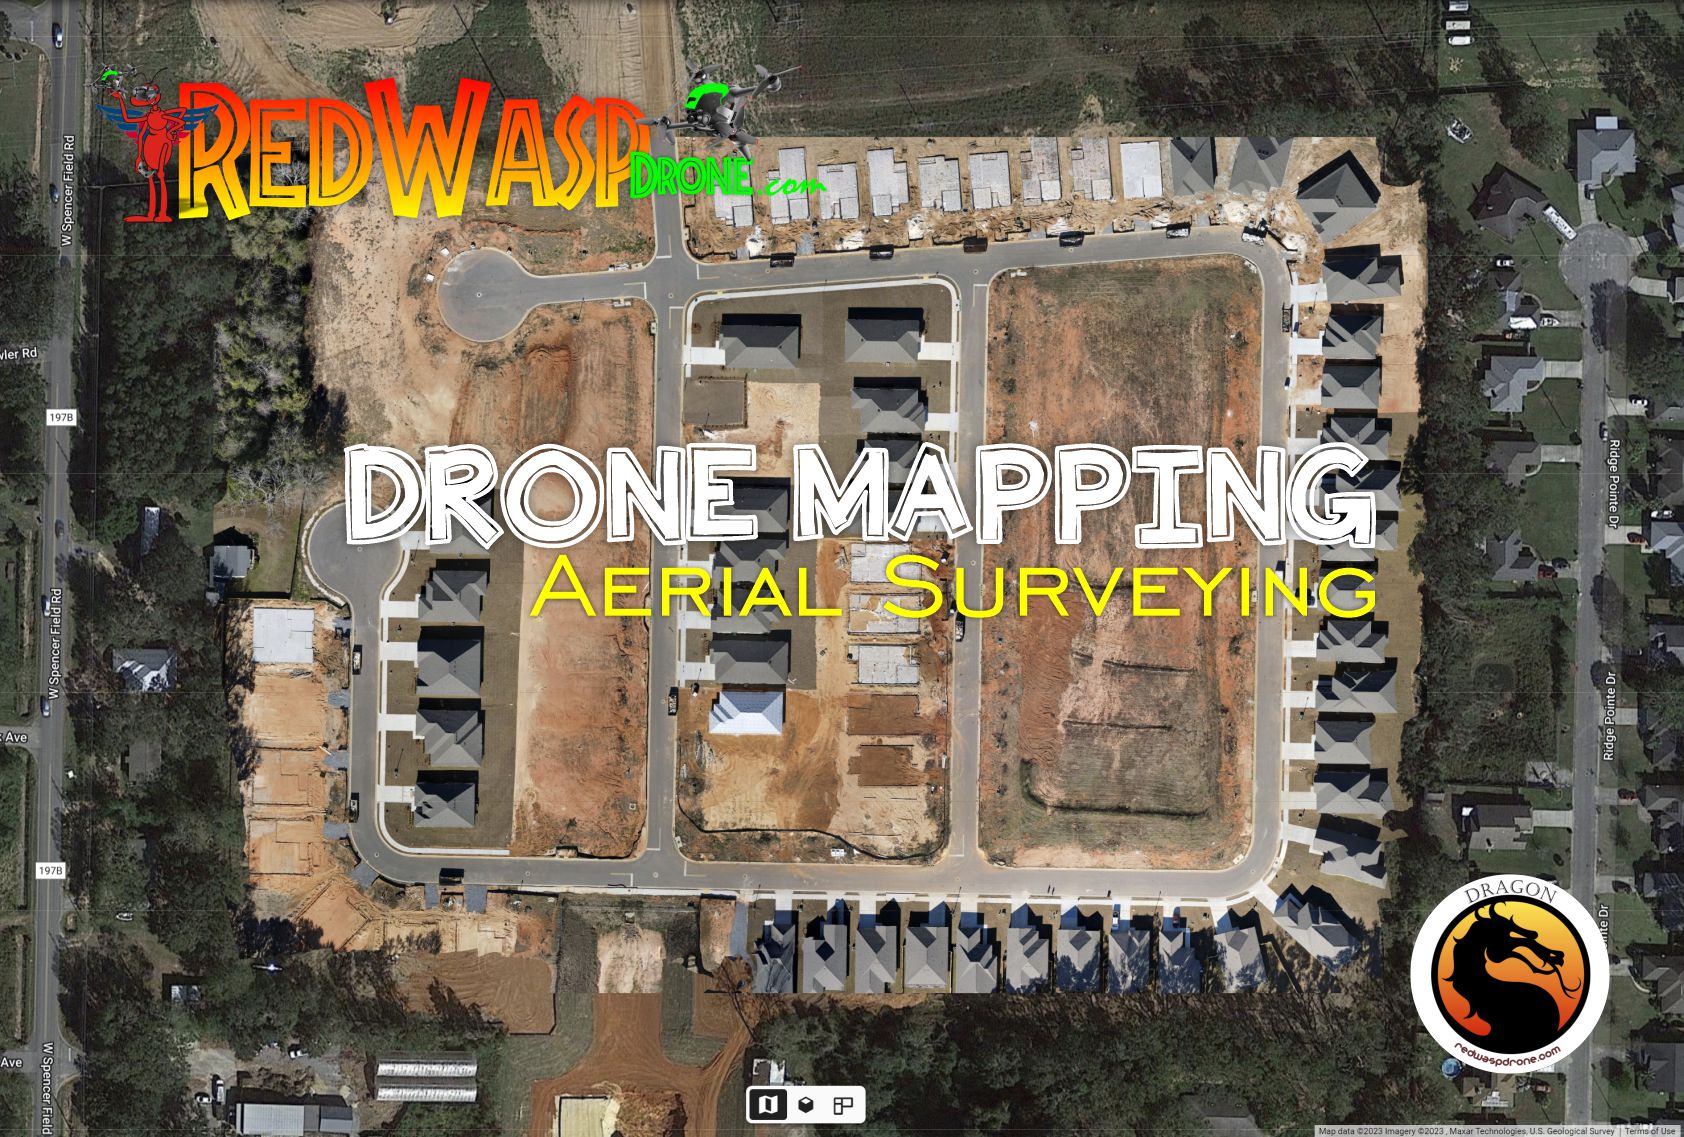 Drone Mapping Aerial Surveying Services by RedWasp